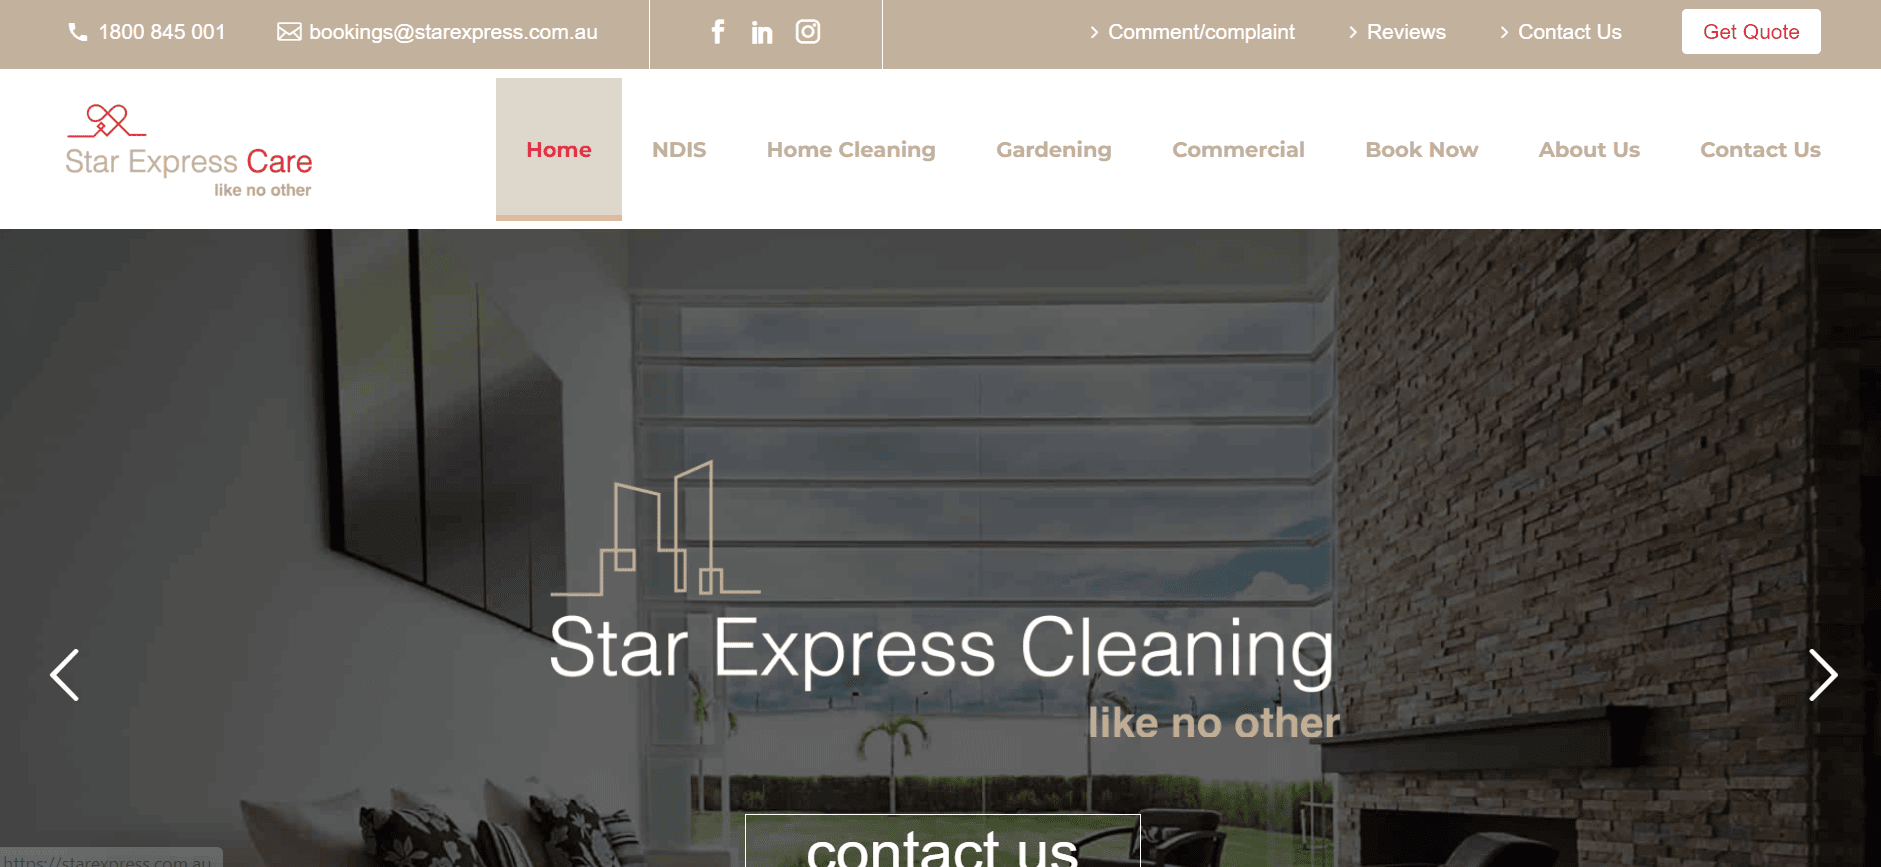 star express care